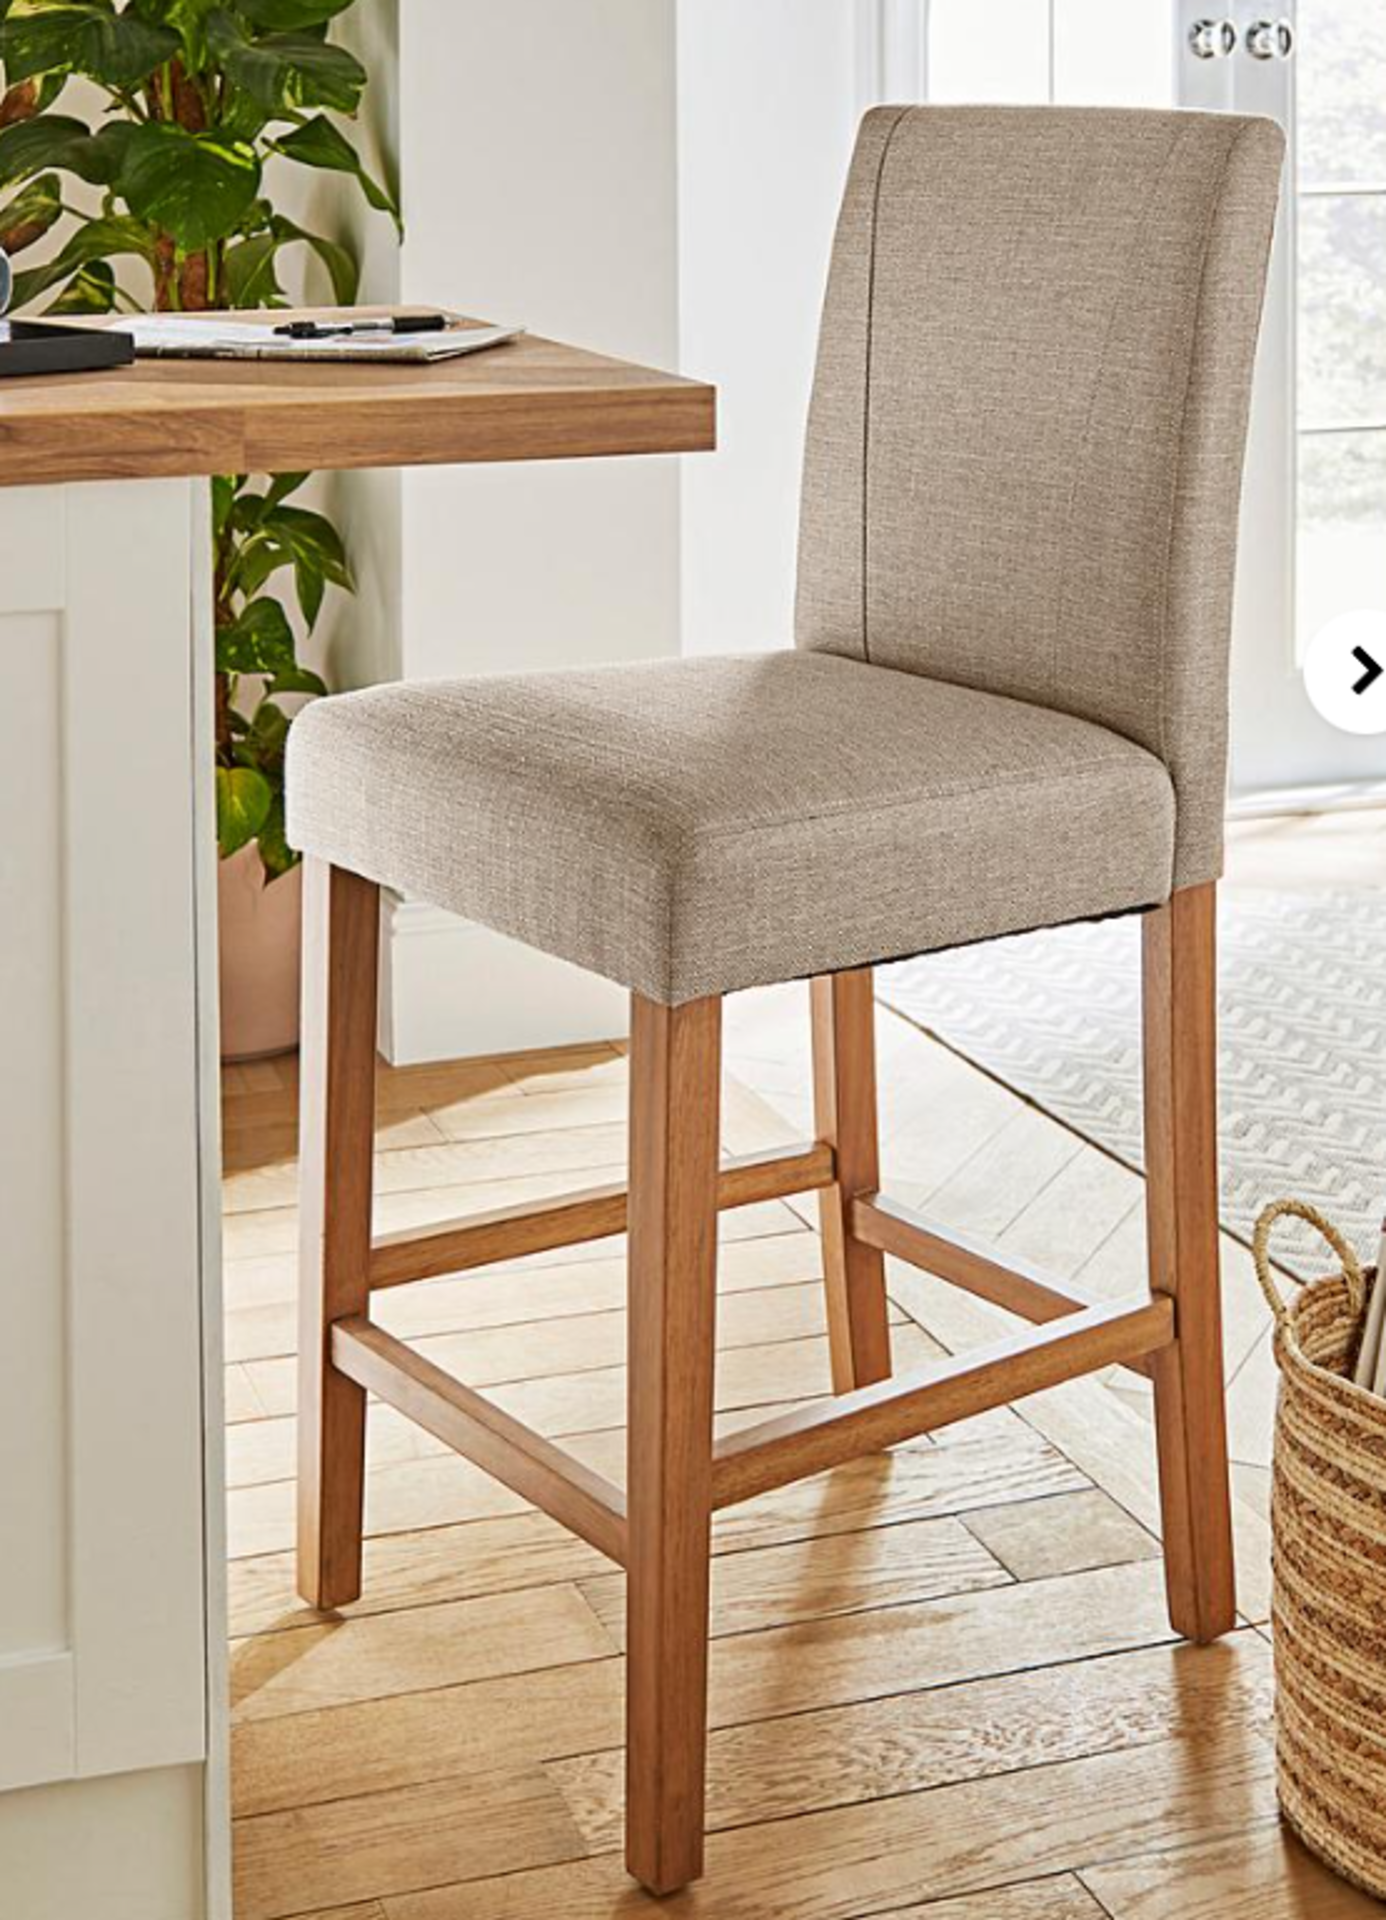 Ava Barstool. - ER20. The Ava Fabric Barstool is a classic design that has been upholstered in a